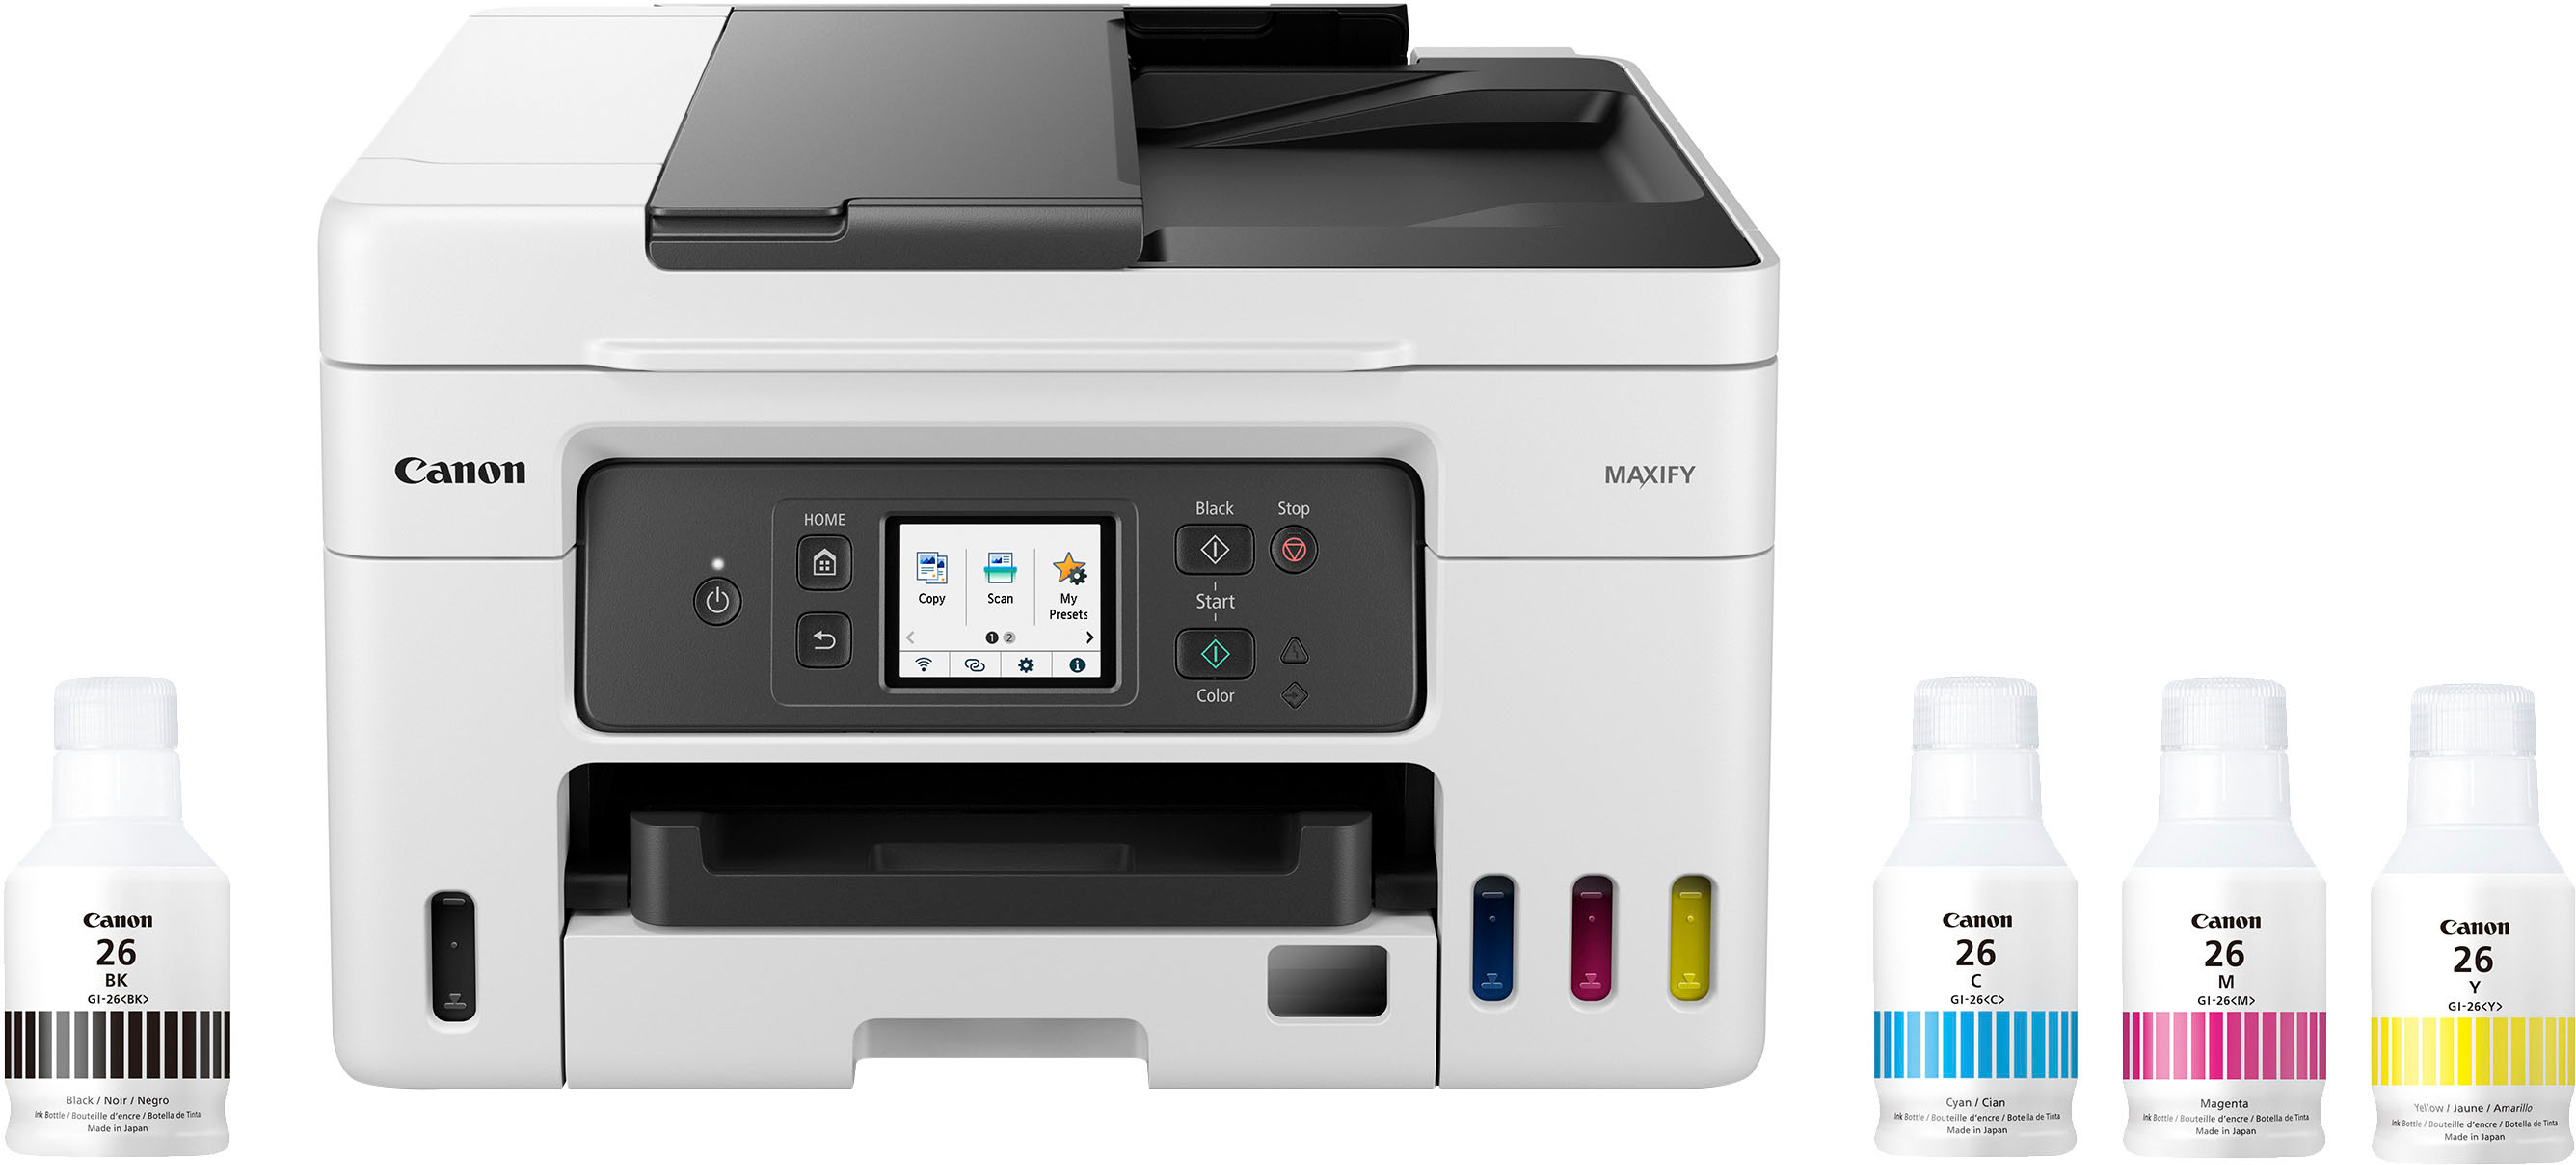 HP Smart Tank 5000 Wireless All-in-One Supertank Inkjet Printer with up to  2 Years of Ink Included White Smart Tank 5000 - Best Buy